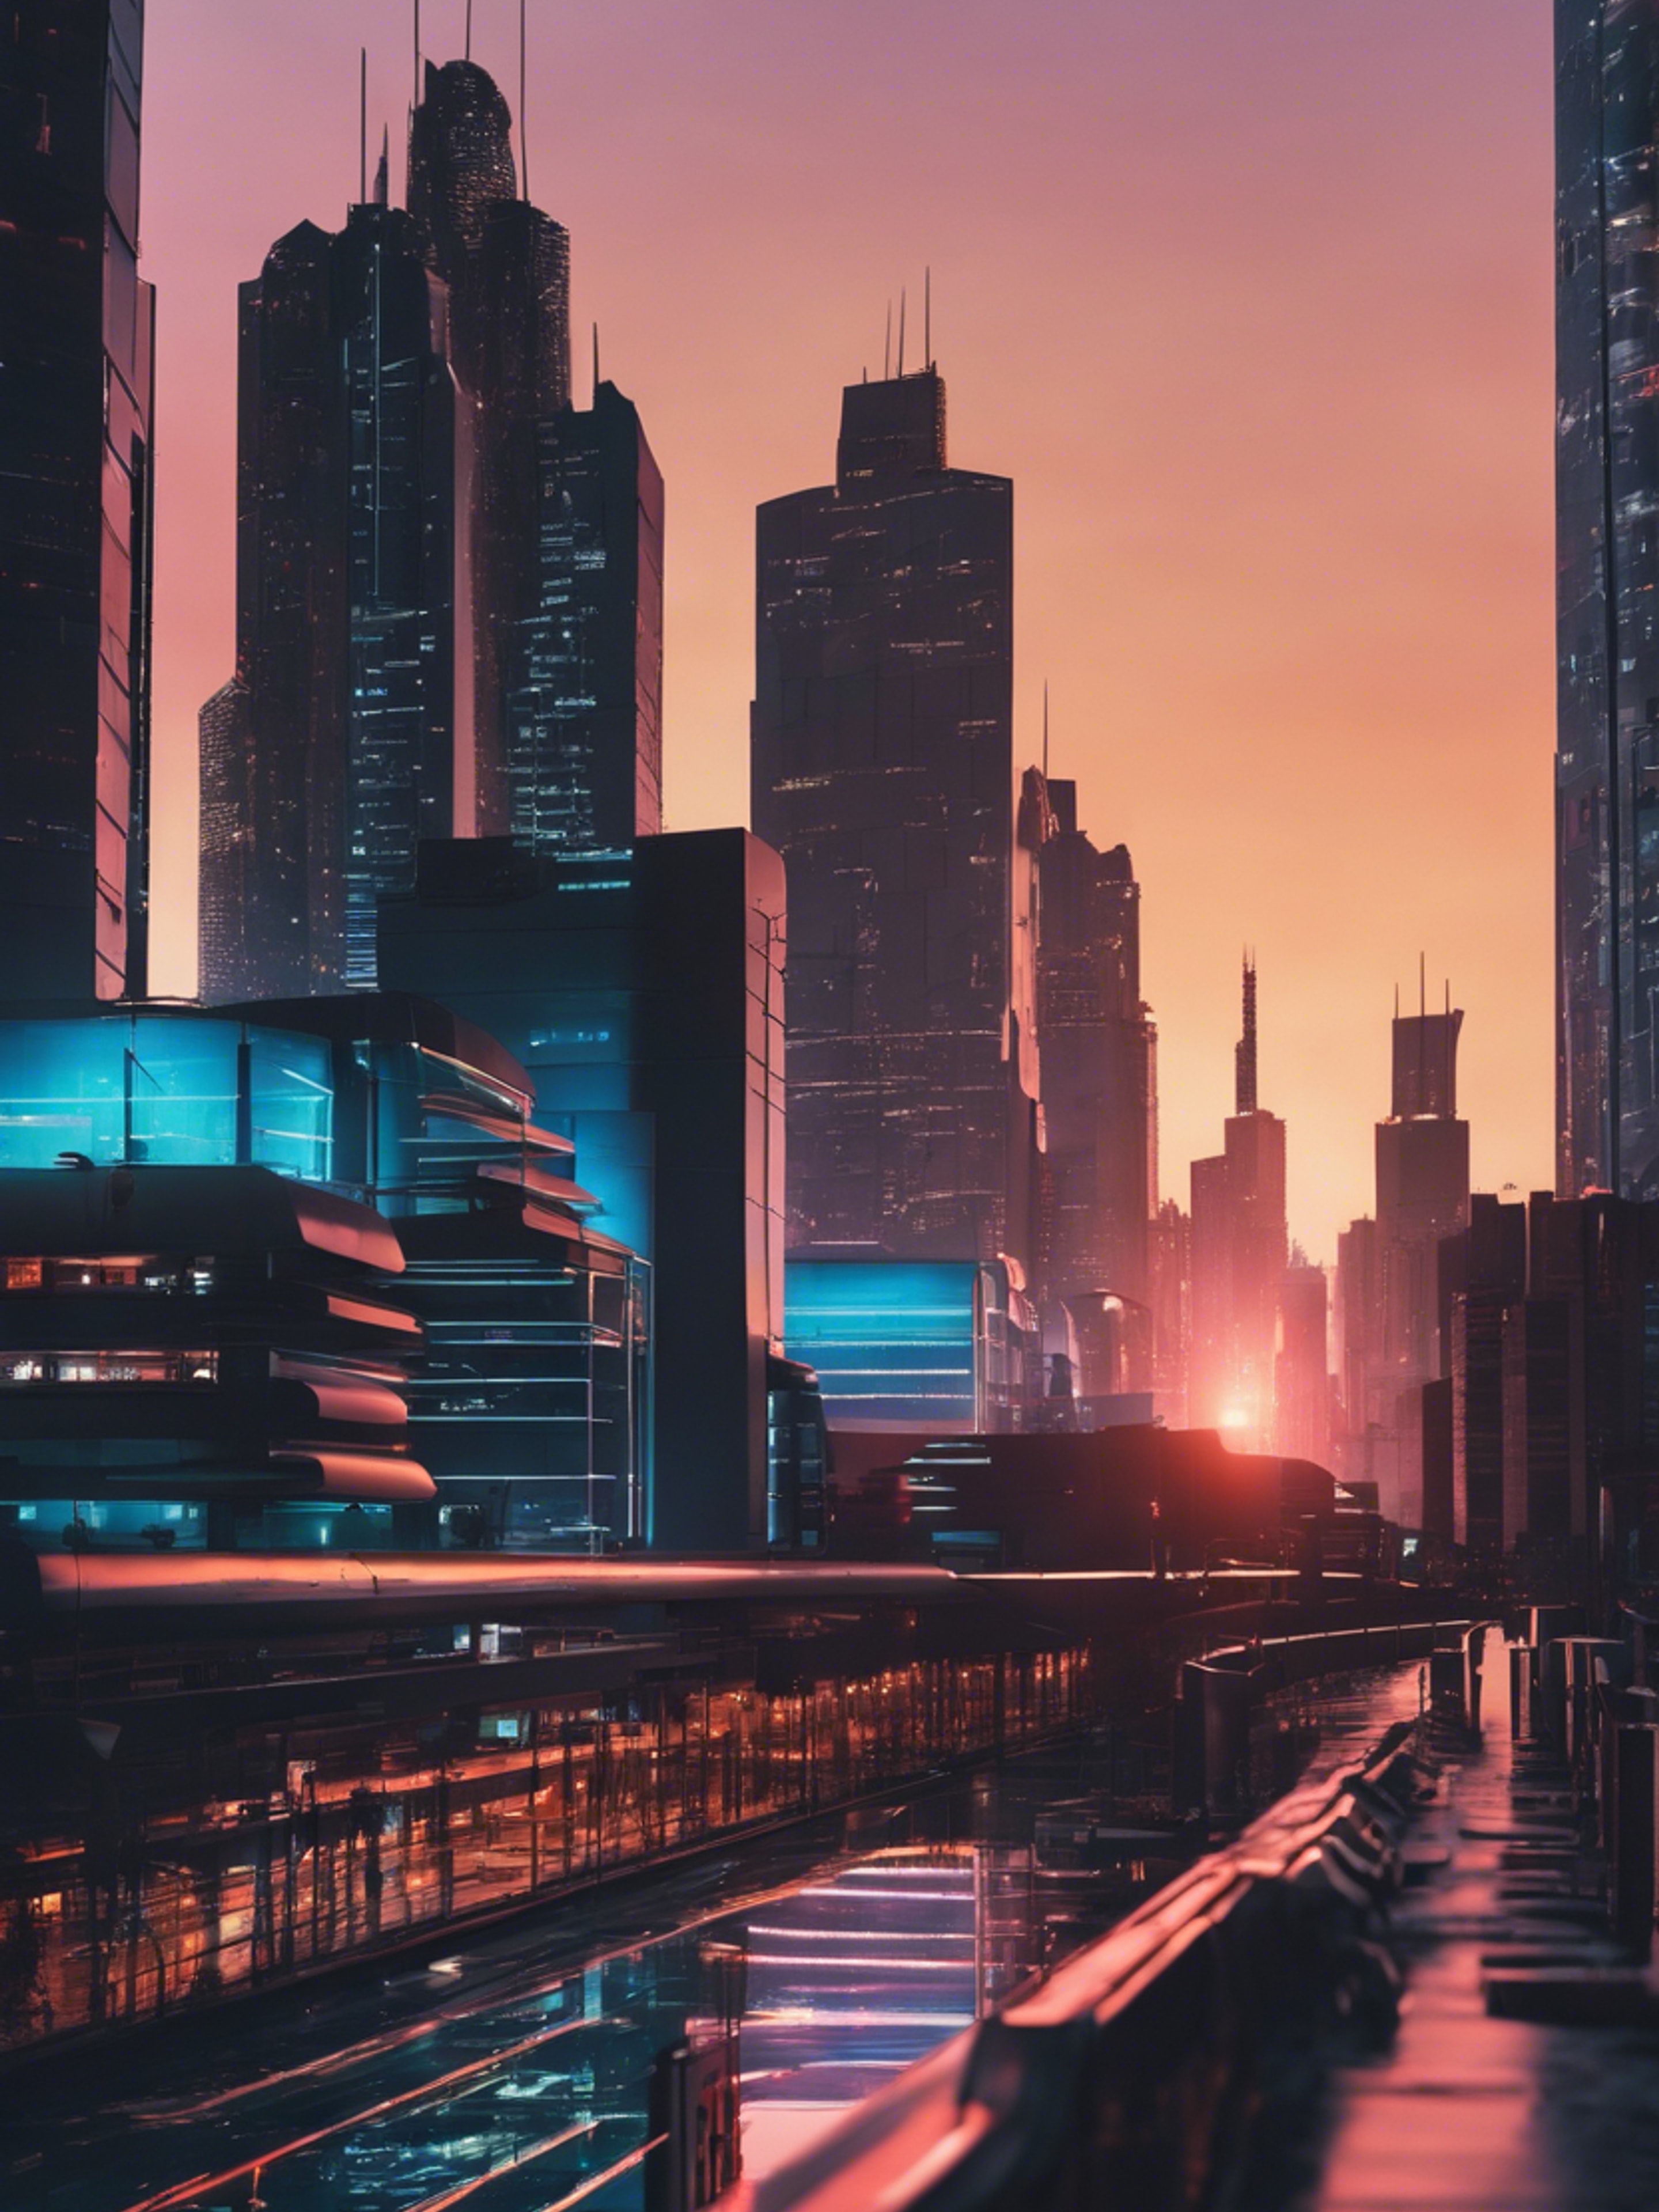 A sleek, futuristic cityscape at sunset, with buildings made of reflective black glass, sparking with cool neon lights.